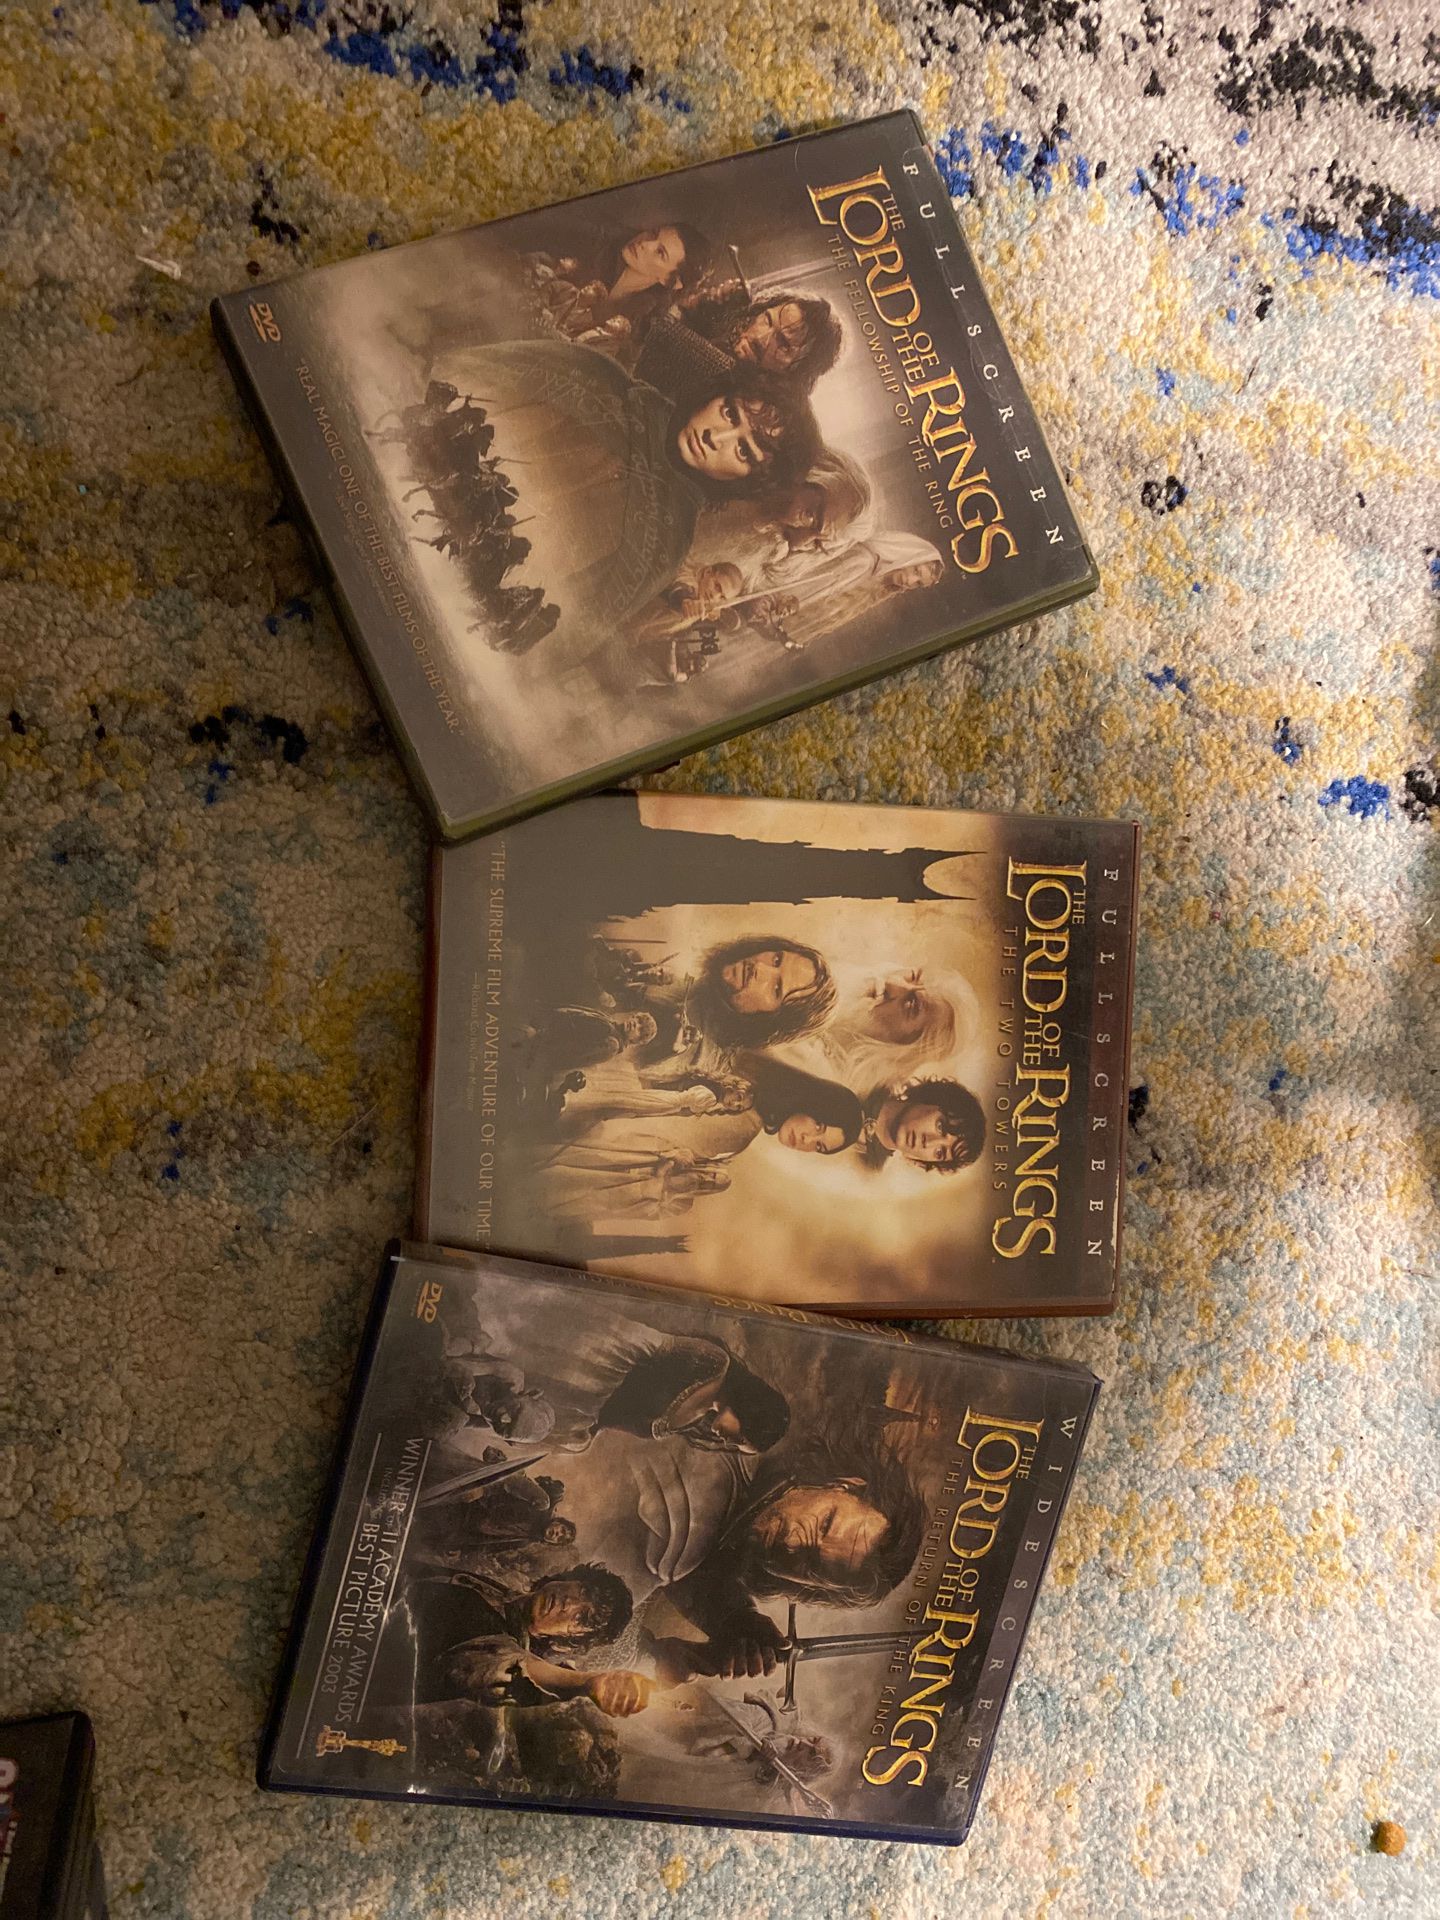 Lord of the rings collection